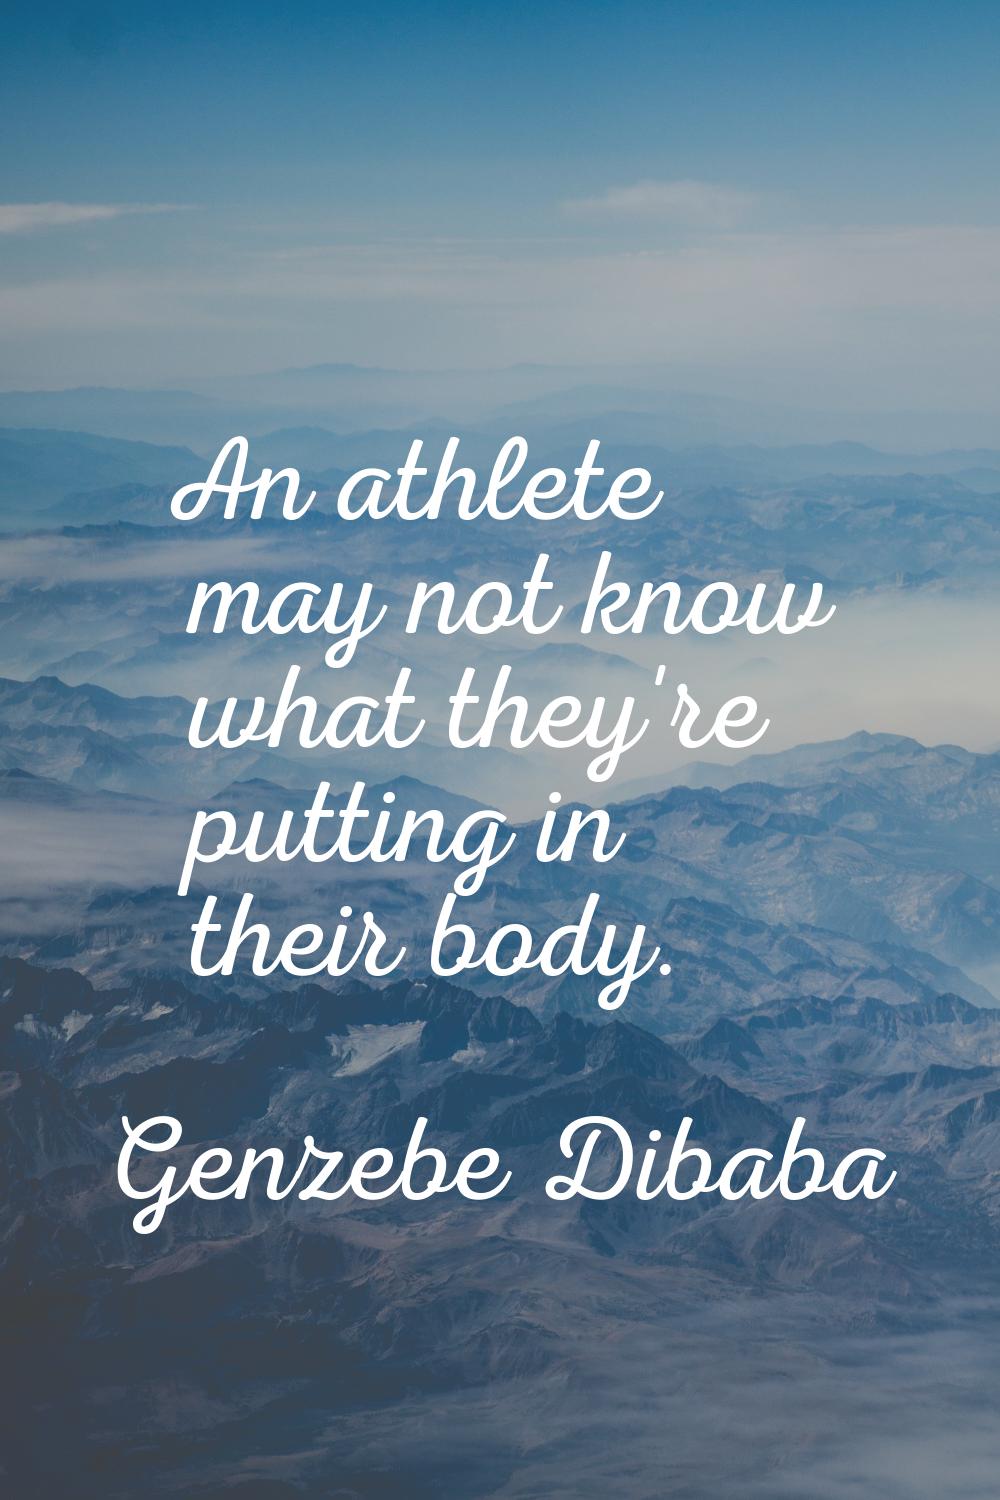 An athlete may not know what they're putting in their body.